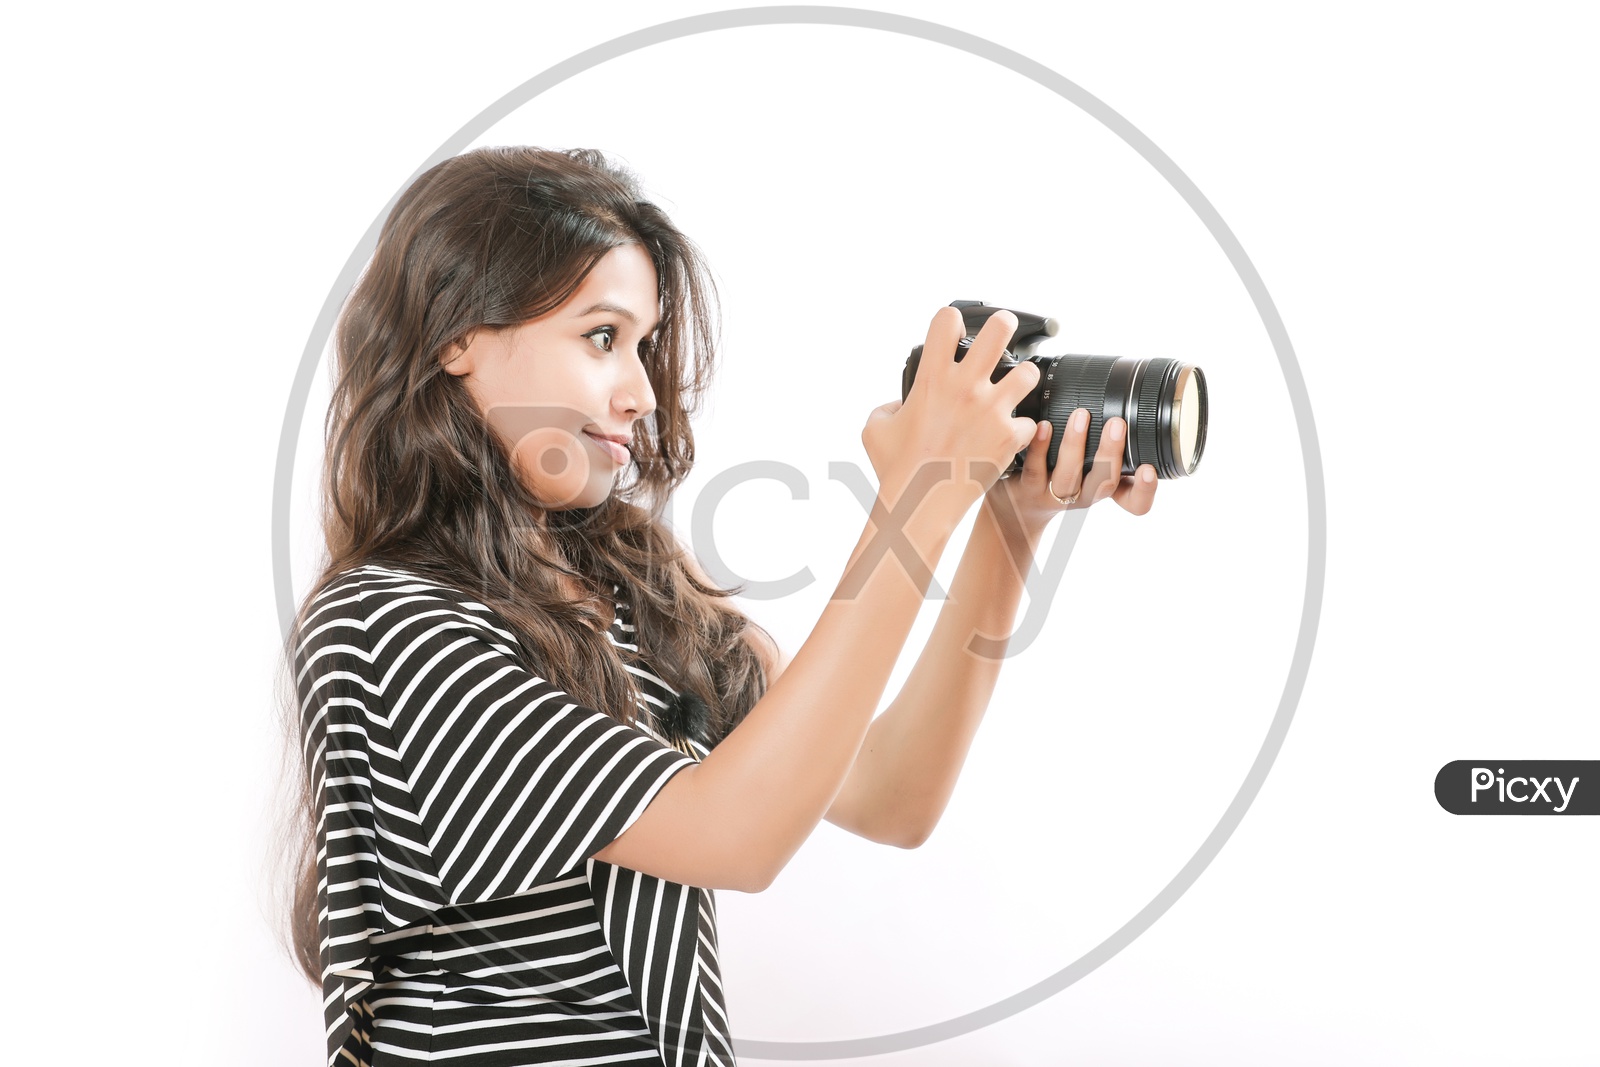 Indian girl take a photo with digital camera on white background